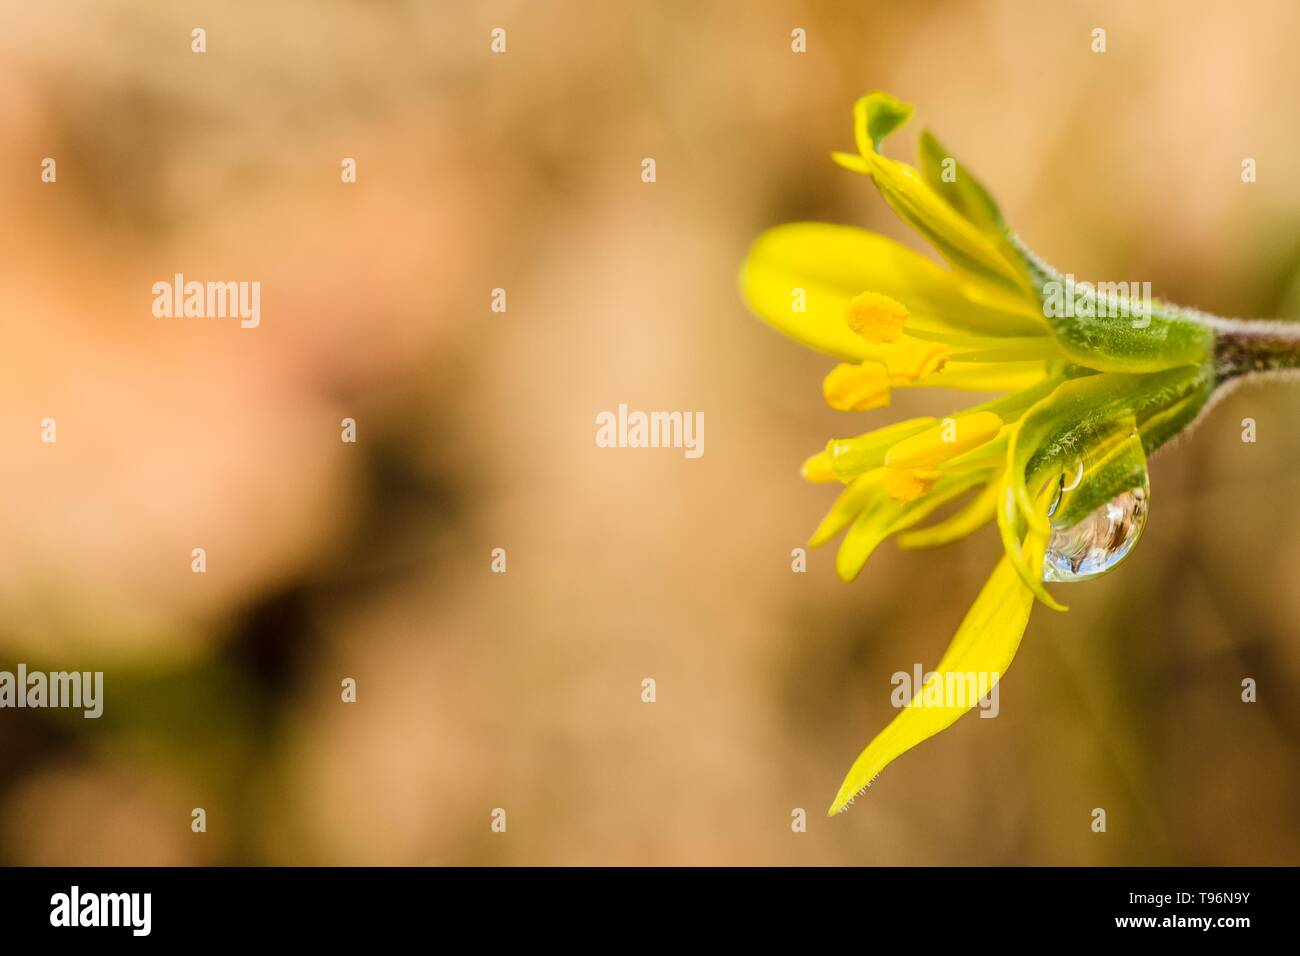 Close up image of fresh bright yellow and green lilly flower, also called hairy star of Bethlehem flower with a raindrop, blurry brown background. Stock Photo